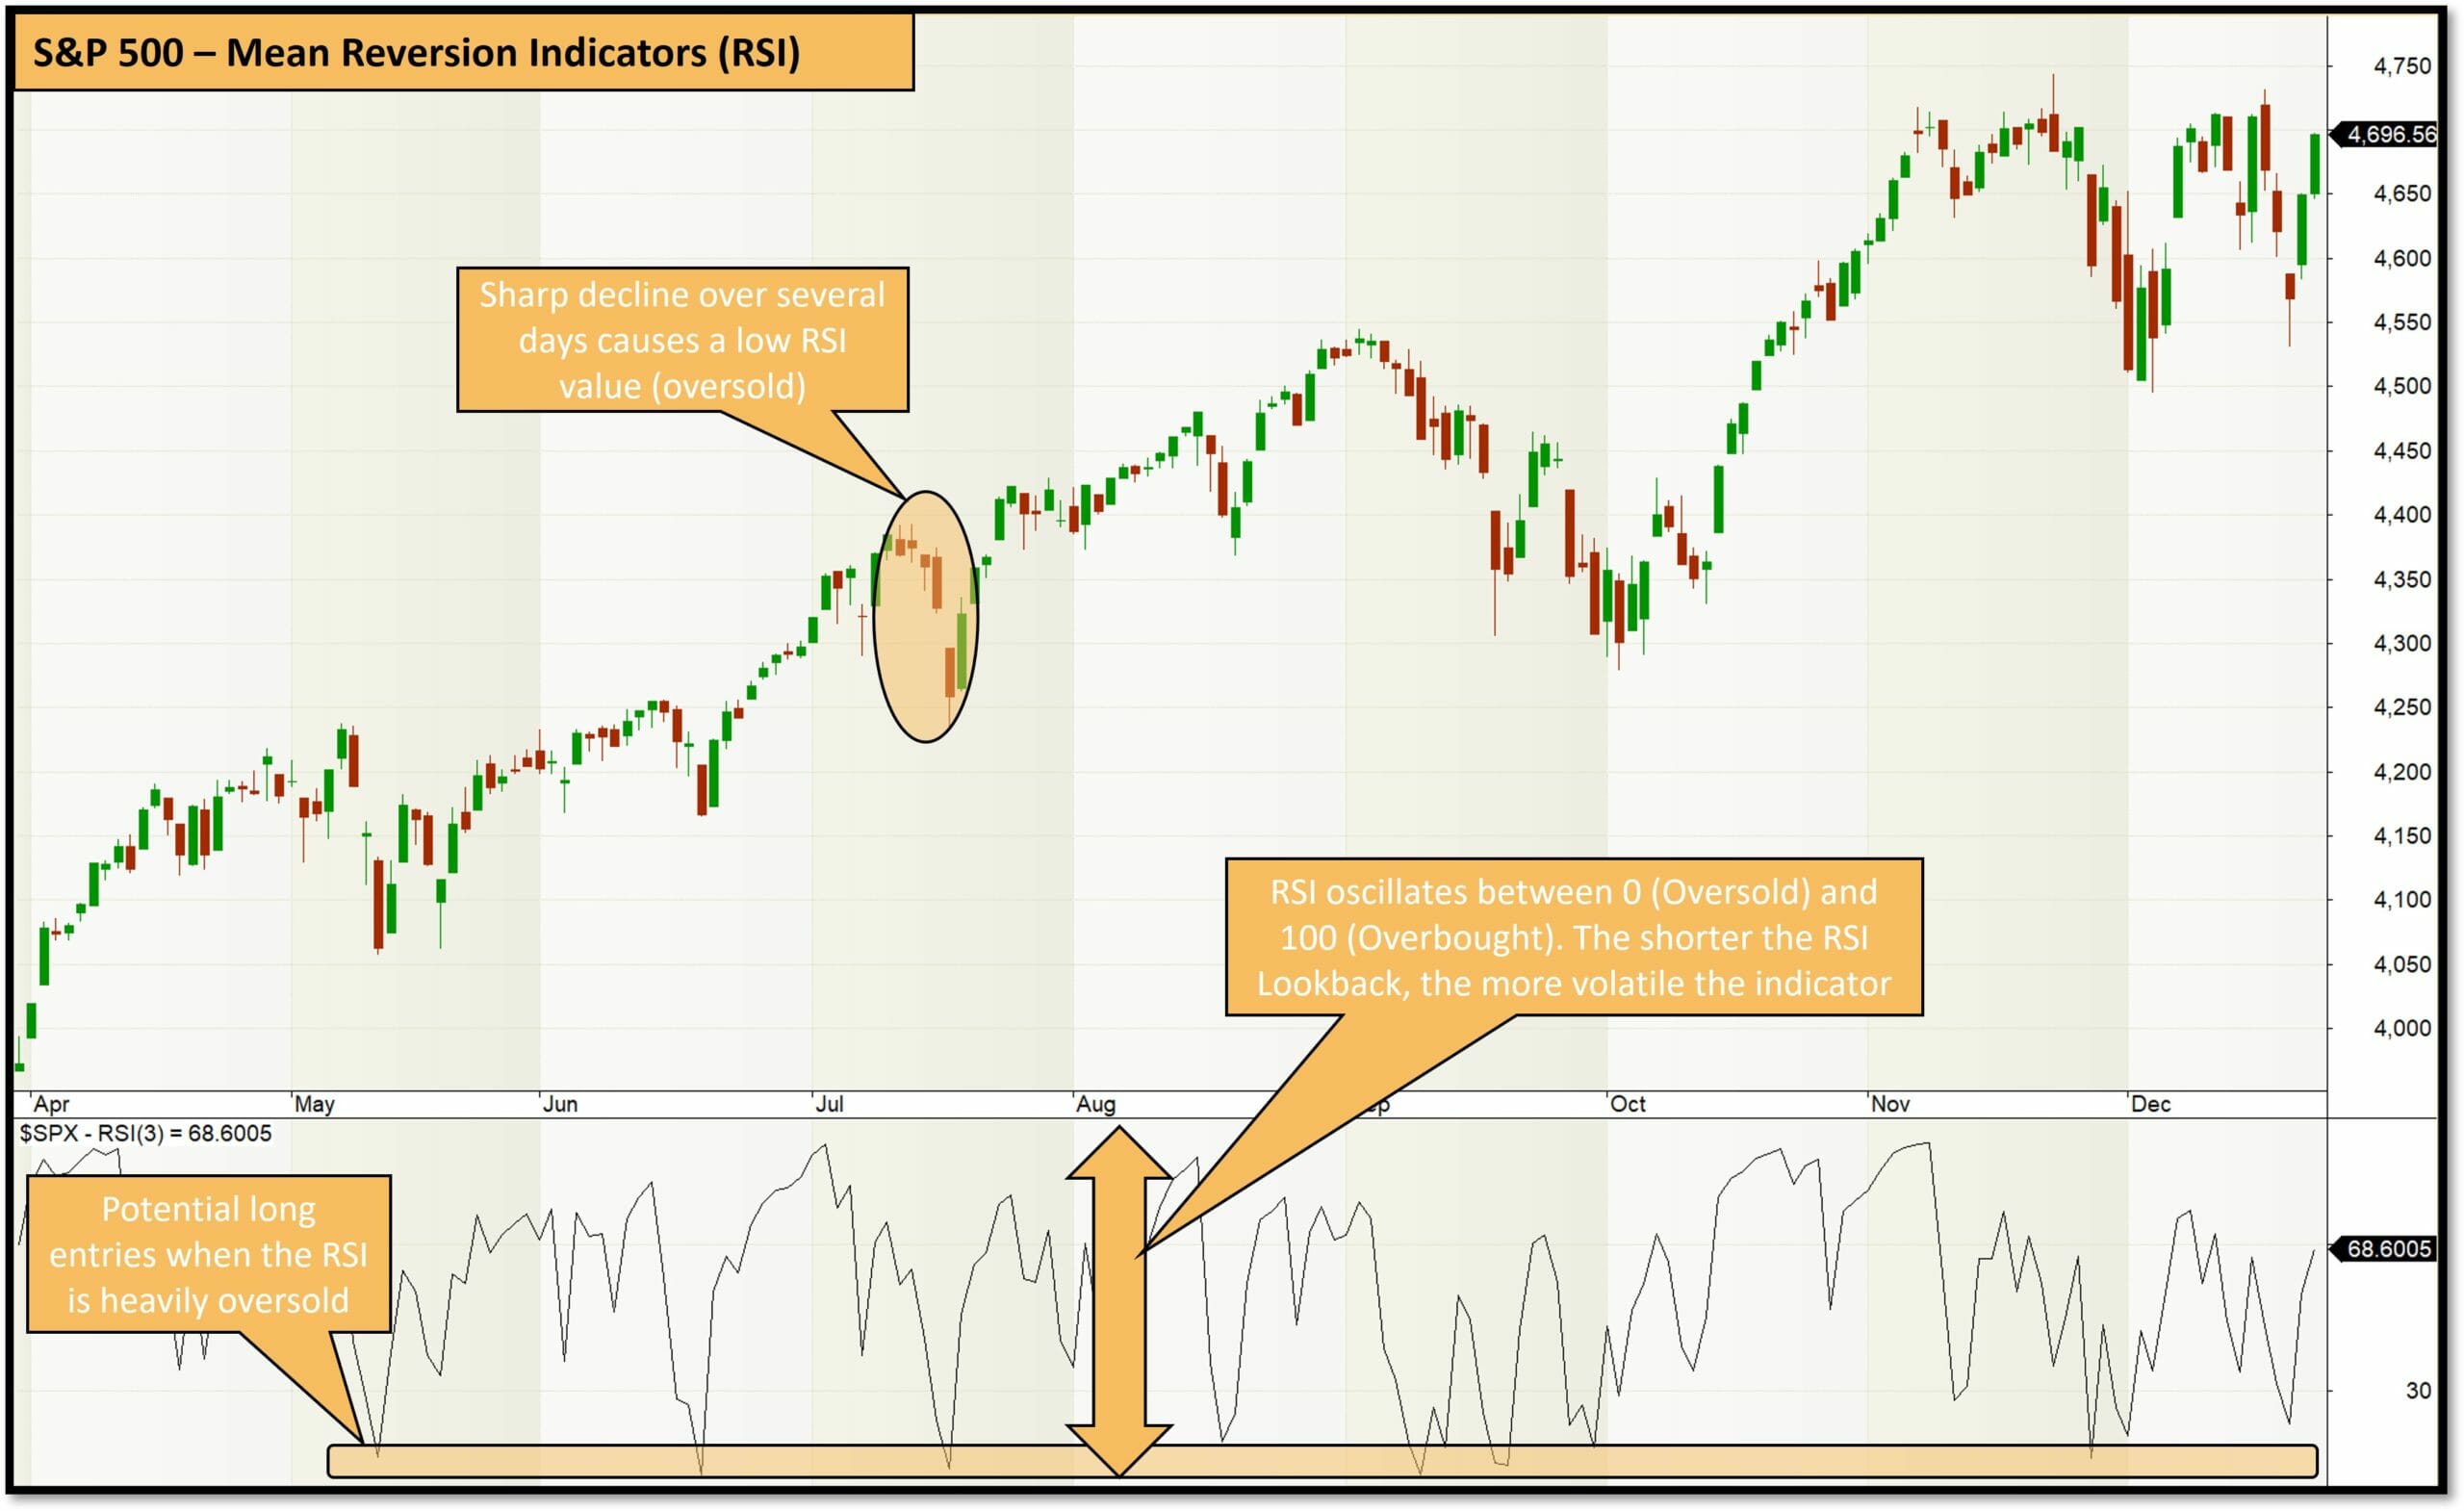 Mean reversion trading indicators - relative strength index - finding potential entries